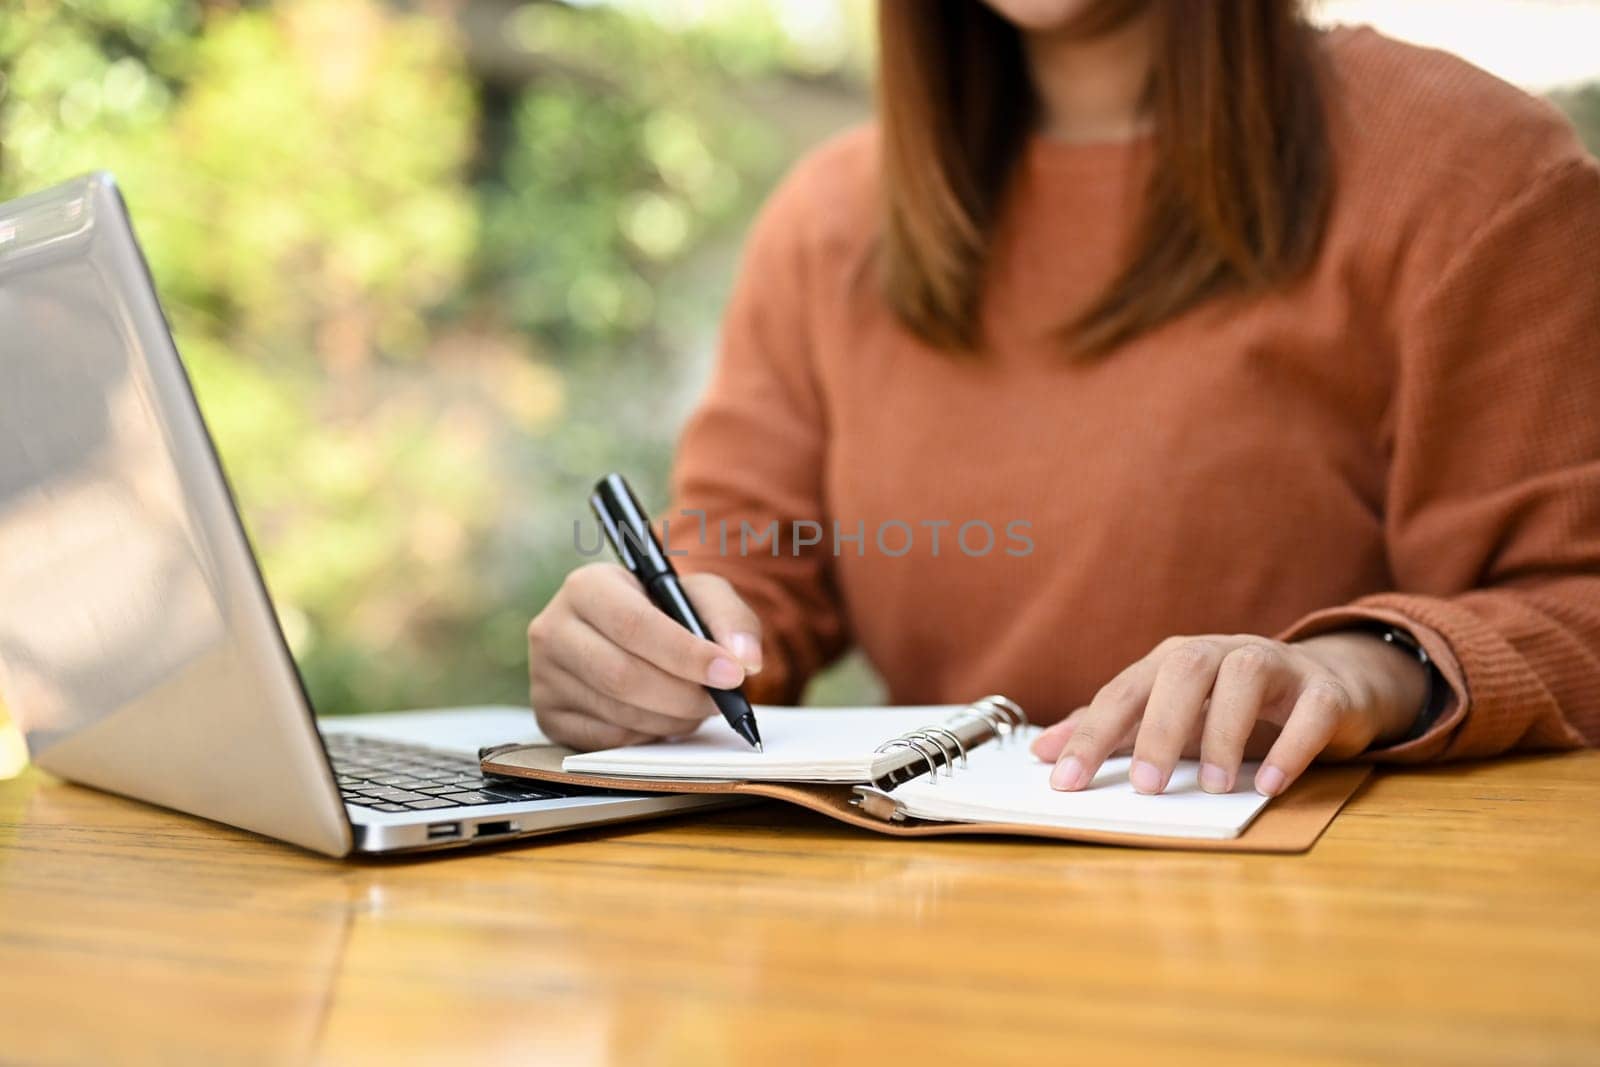 Female freelancer using laptop and writing notes in personal daily planner, planning workday.